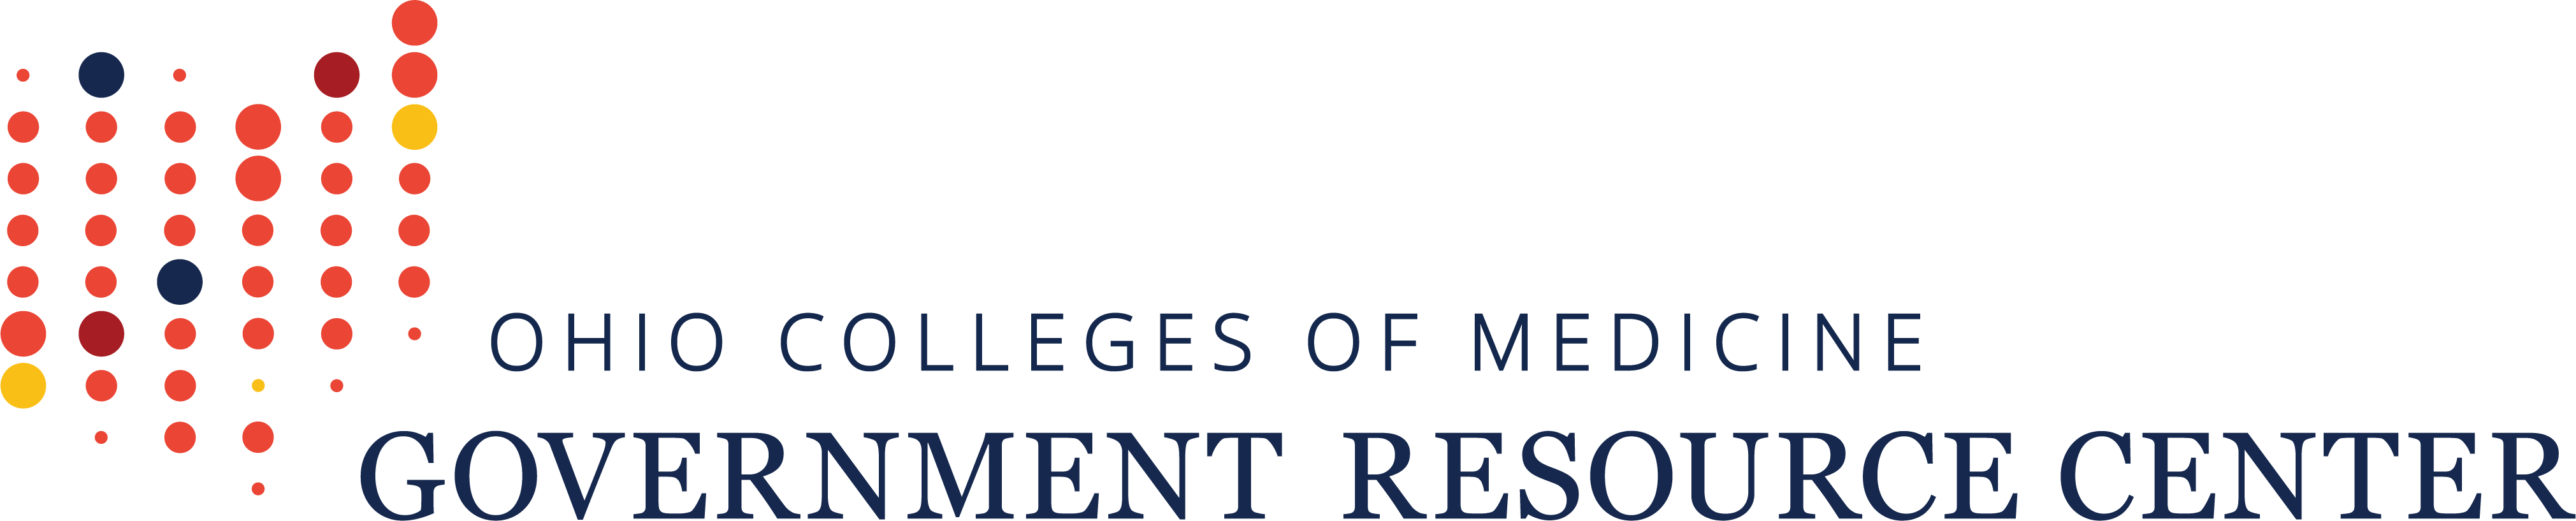 “Ohio Colleges of Medicine Government Resource Center” in navy text preceded by multi-colored dots in the shape of the state of Ohio.